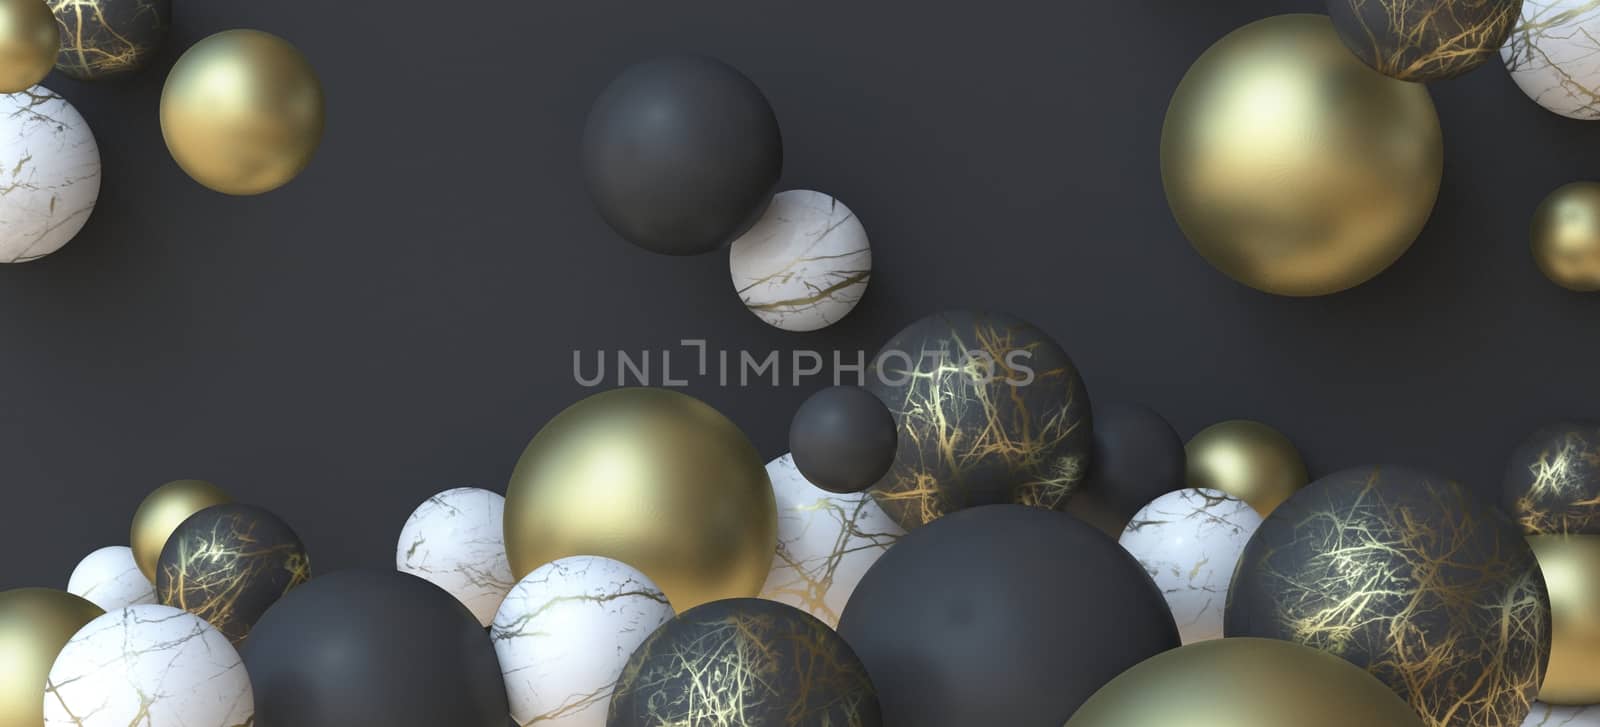 Abstract background made of different material falling balls 3D render illustration on black background